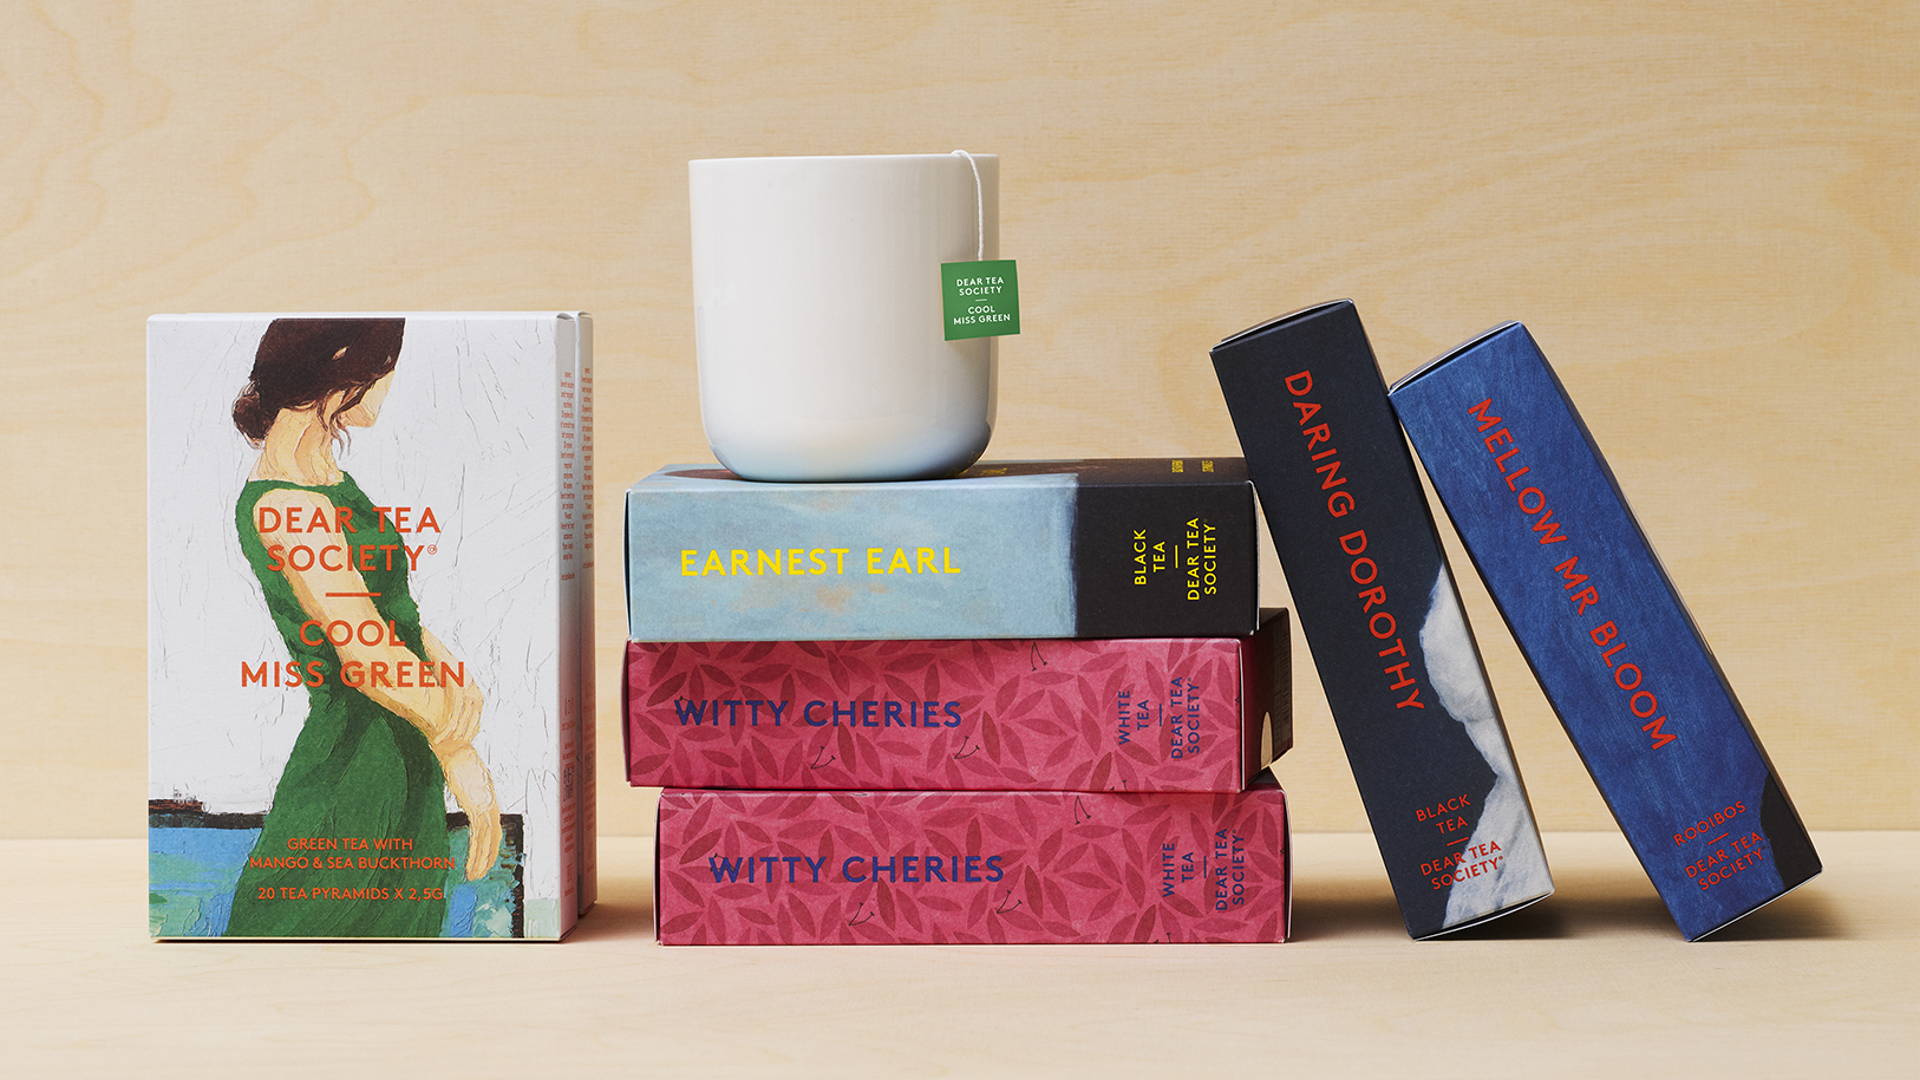 Featured image for Open Studio Creates The Perfect Combo of Tea & Books With Dear Tea Society